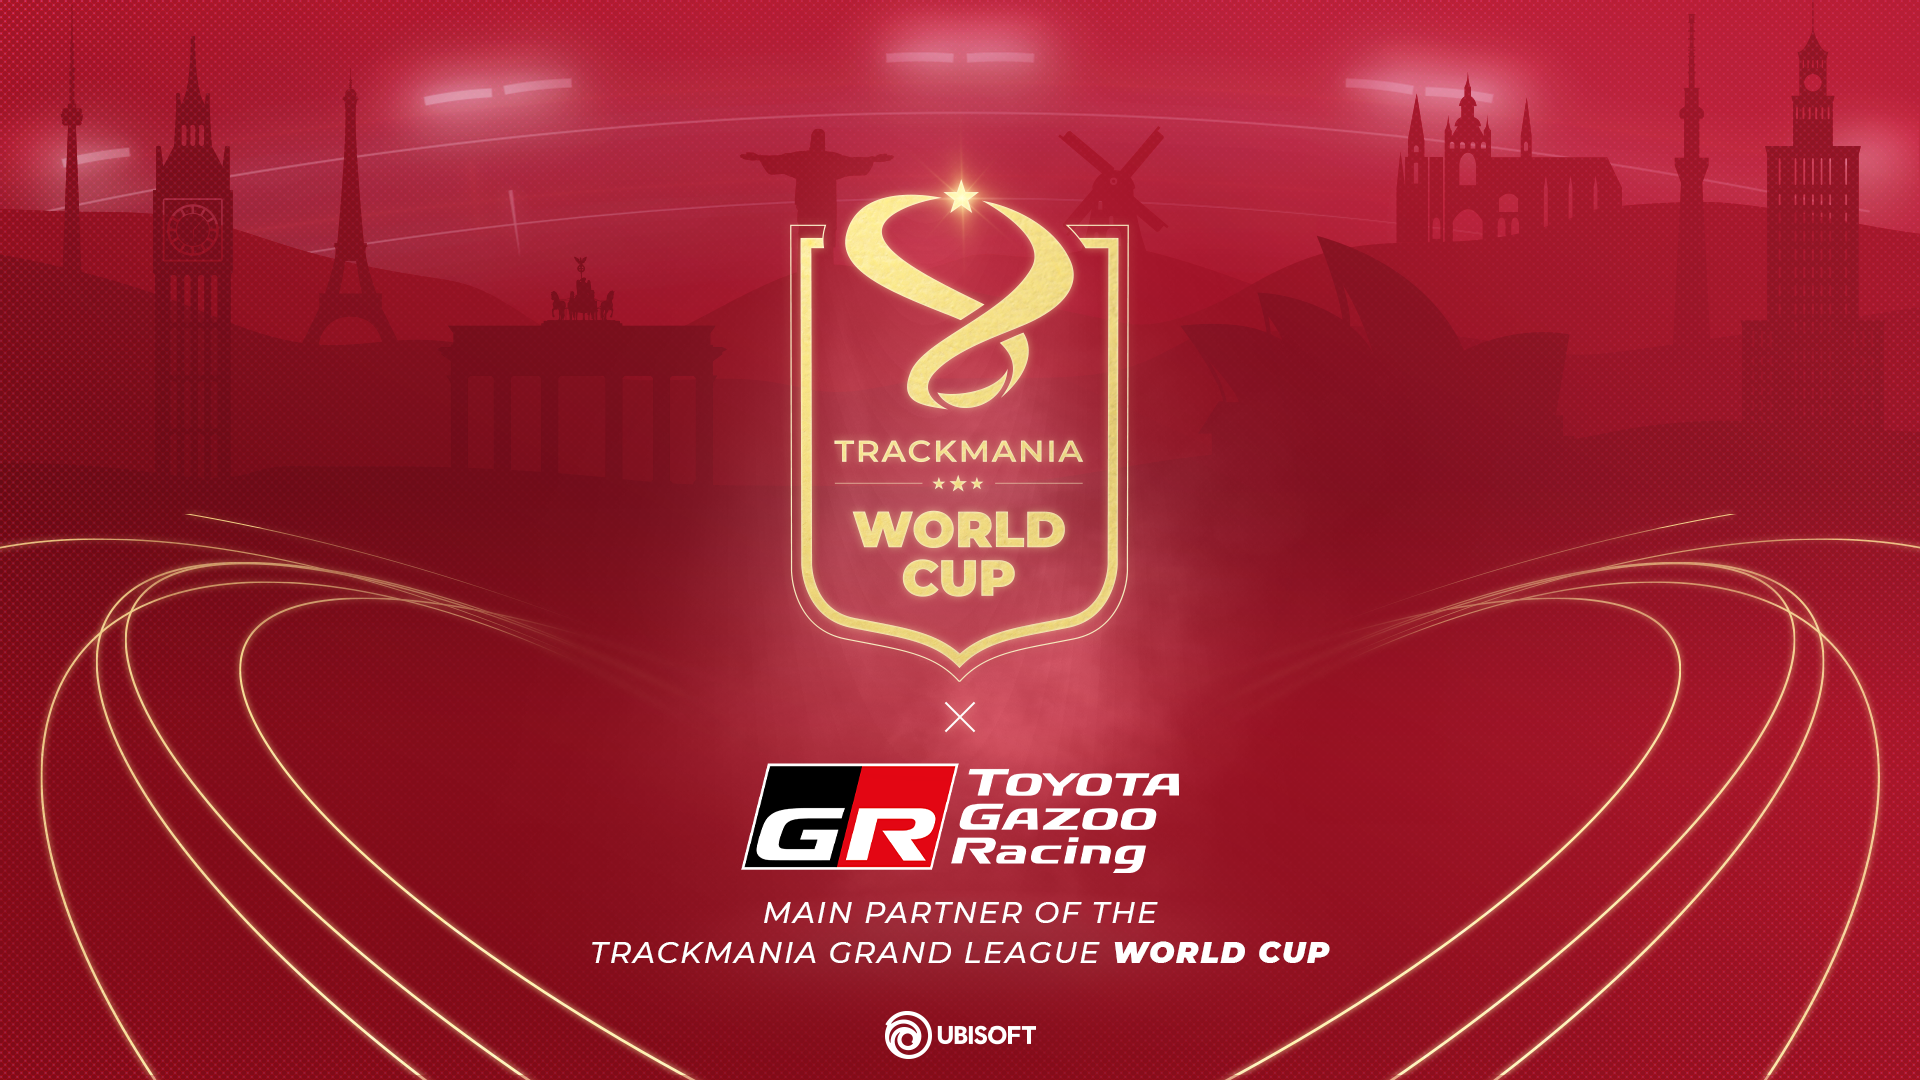 Toyota GAZOO Racing, new partner of the Trackmania Grand League World Cup!